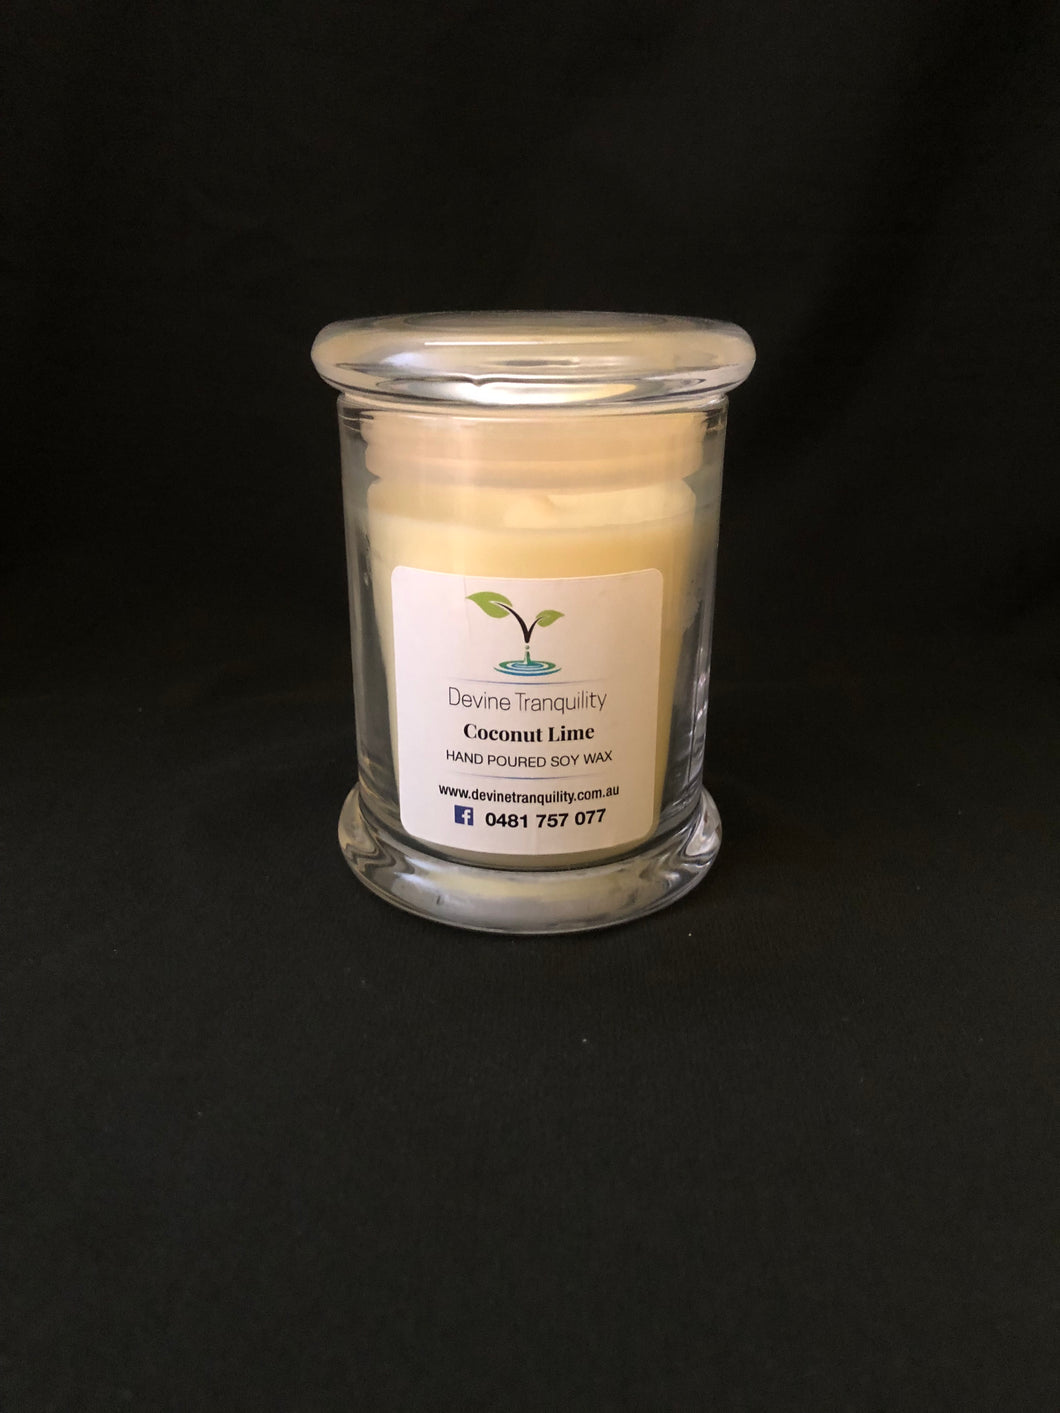 Coconut lime/soy/wax/ large/candle